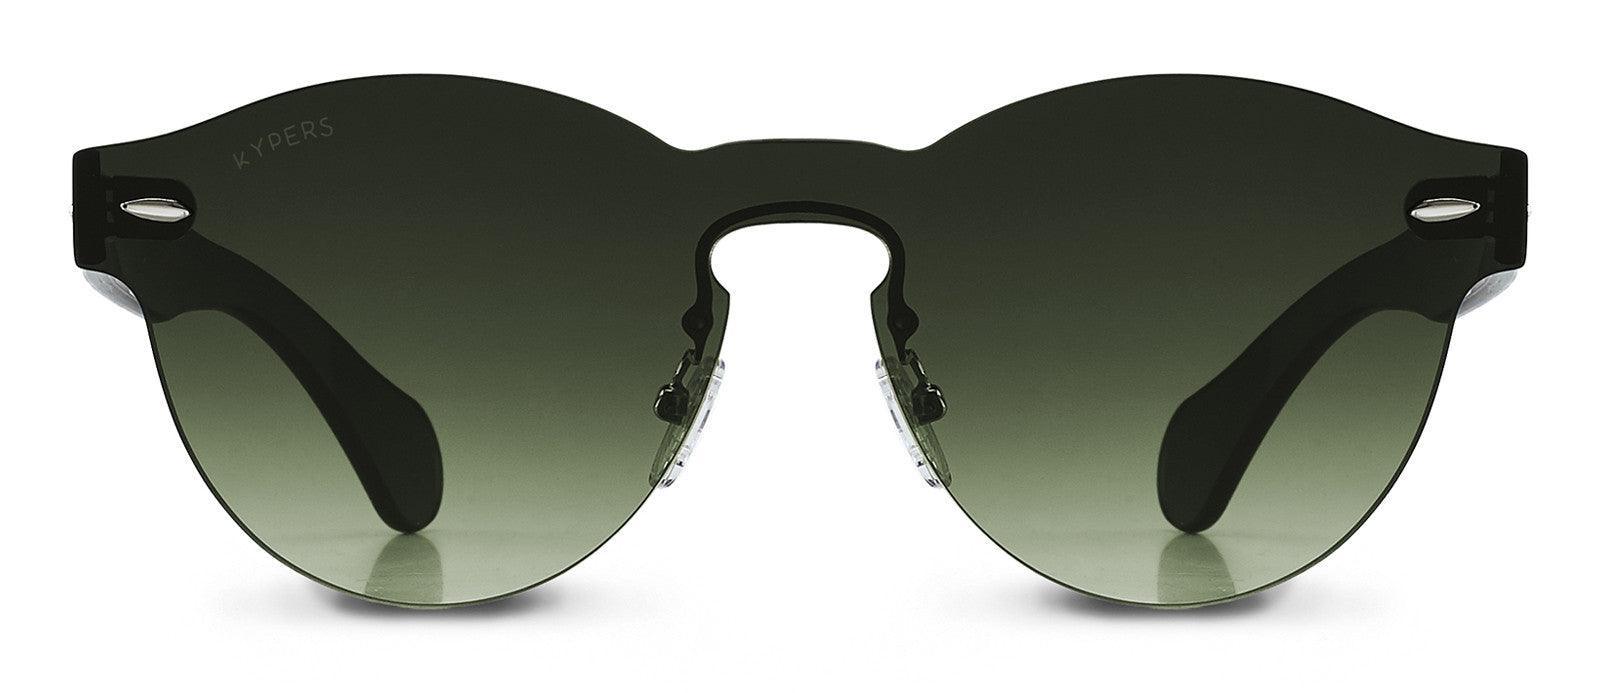 KYPERS sunglasses model LUA LU005 with black frame and green mirror lens